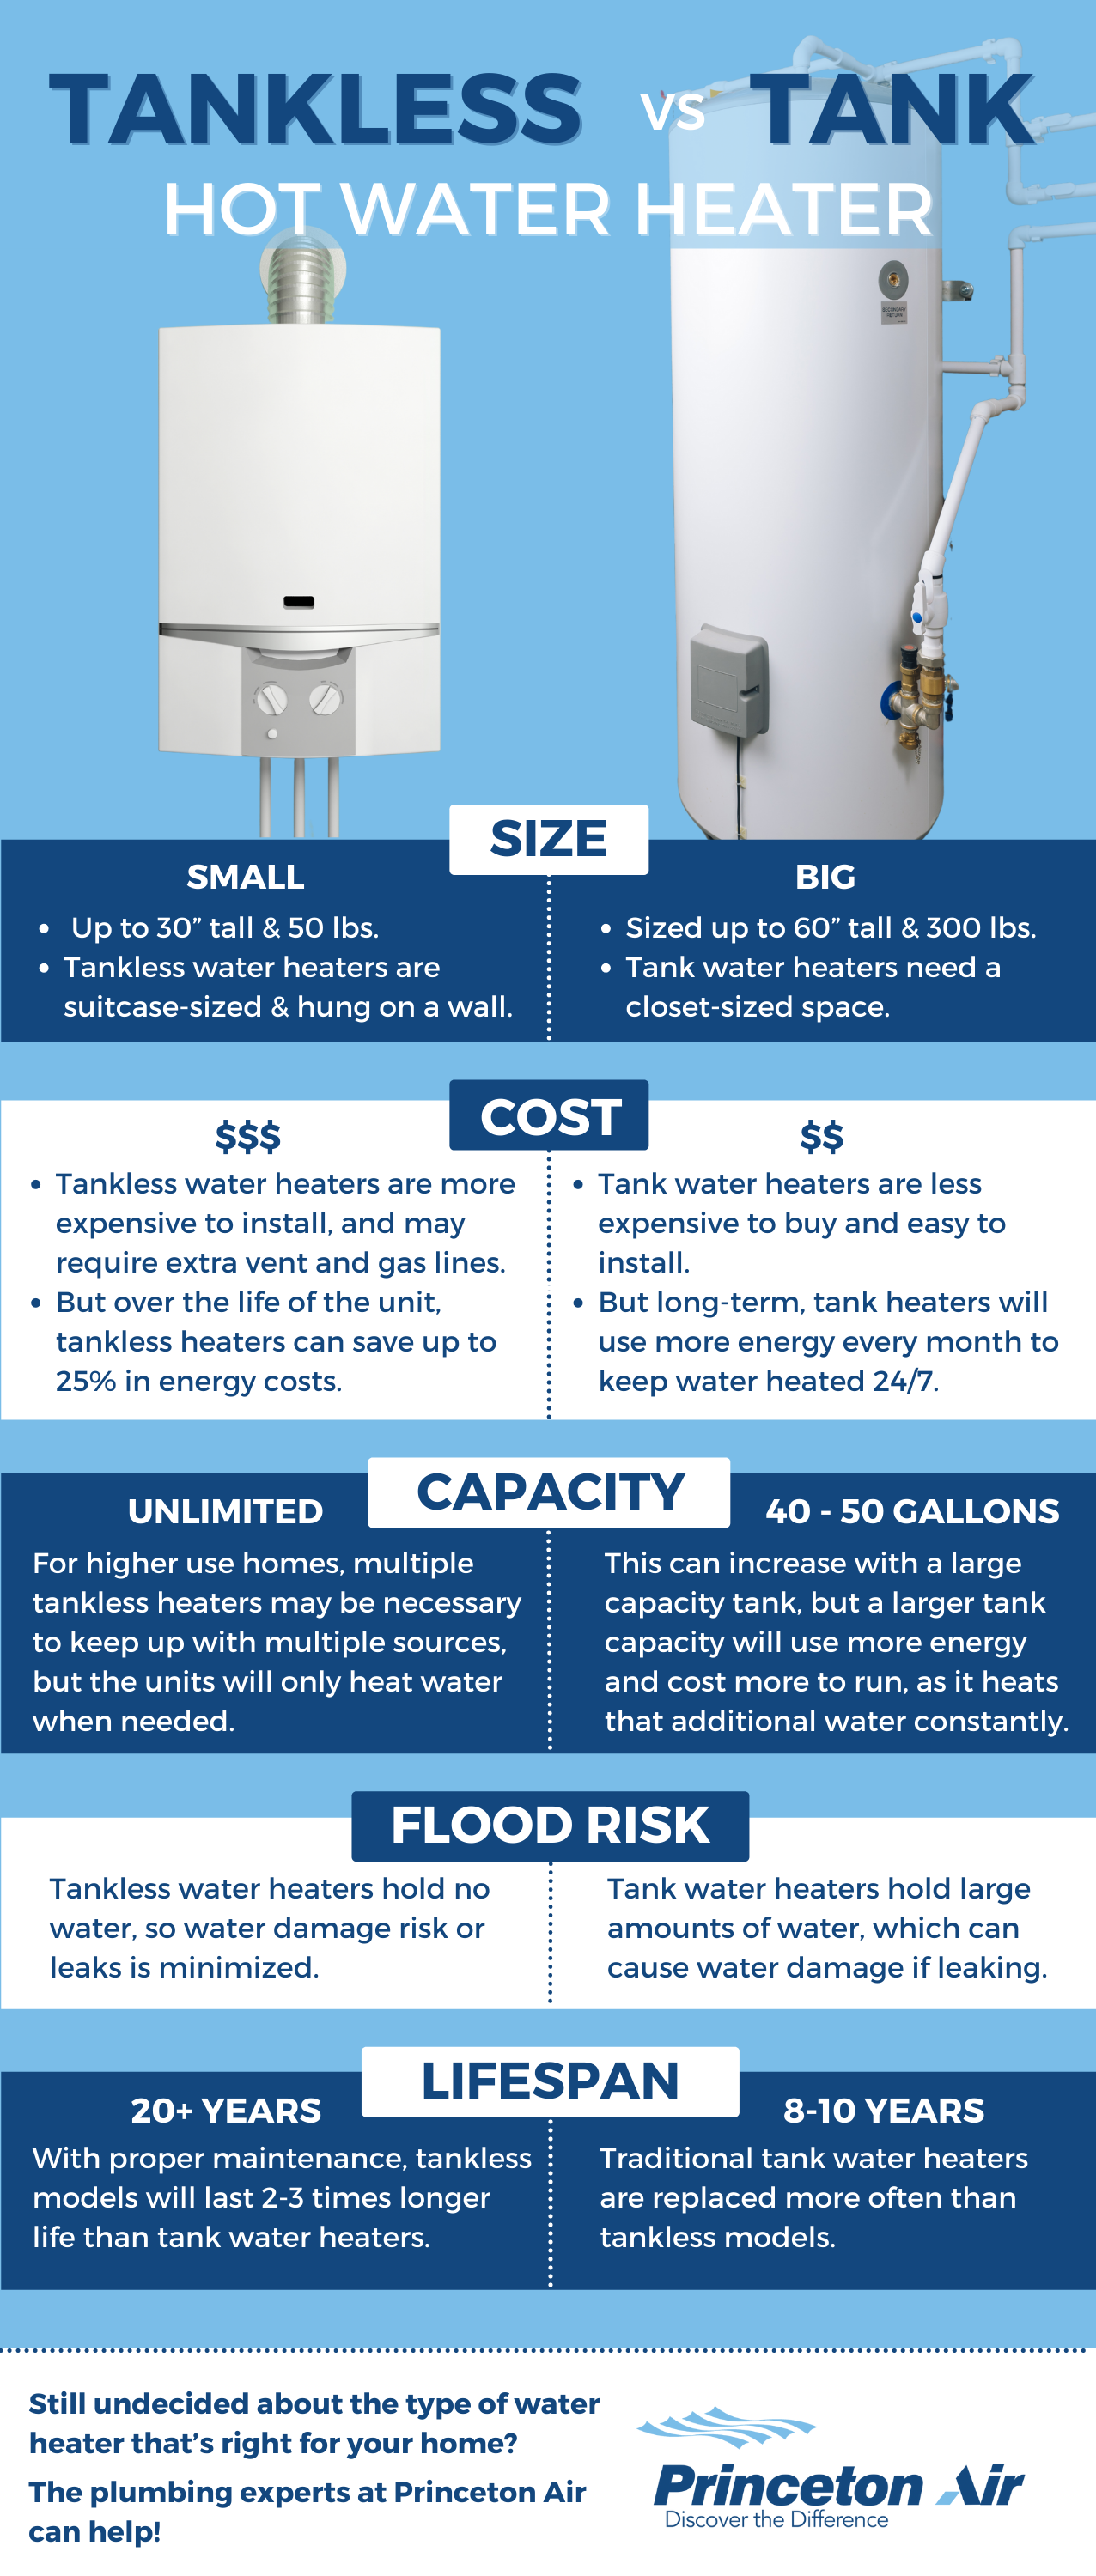 Princeton Air Tank vs. Tankless Water Heater Infographic